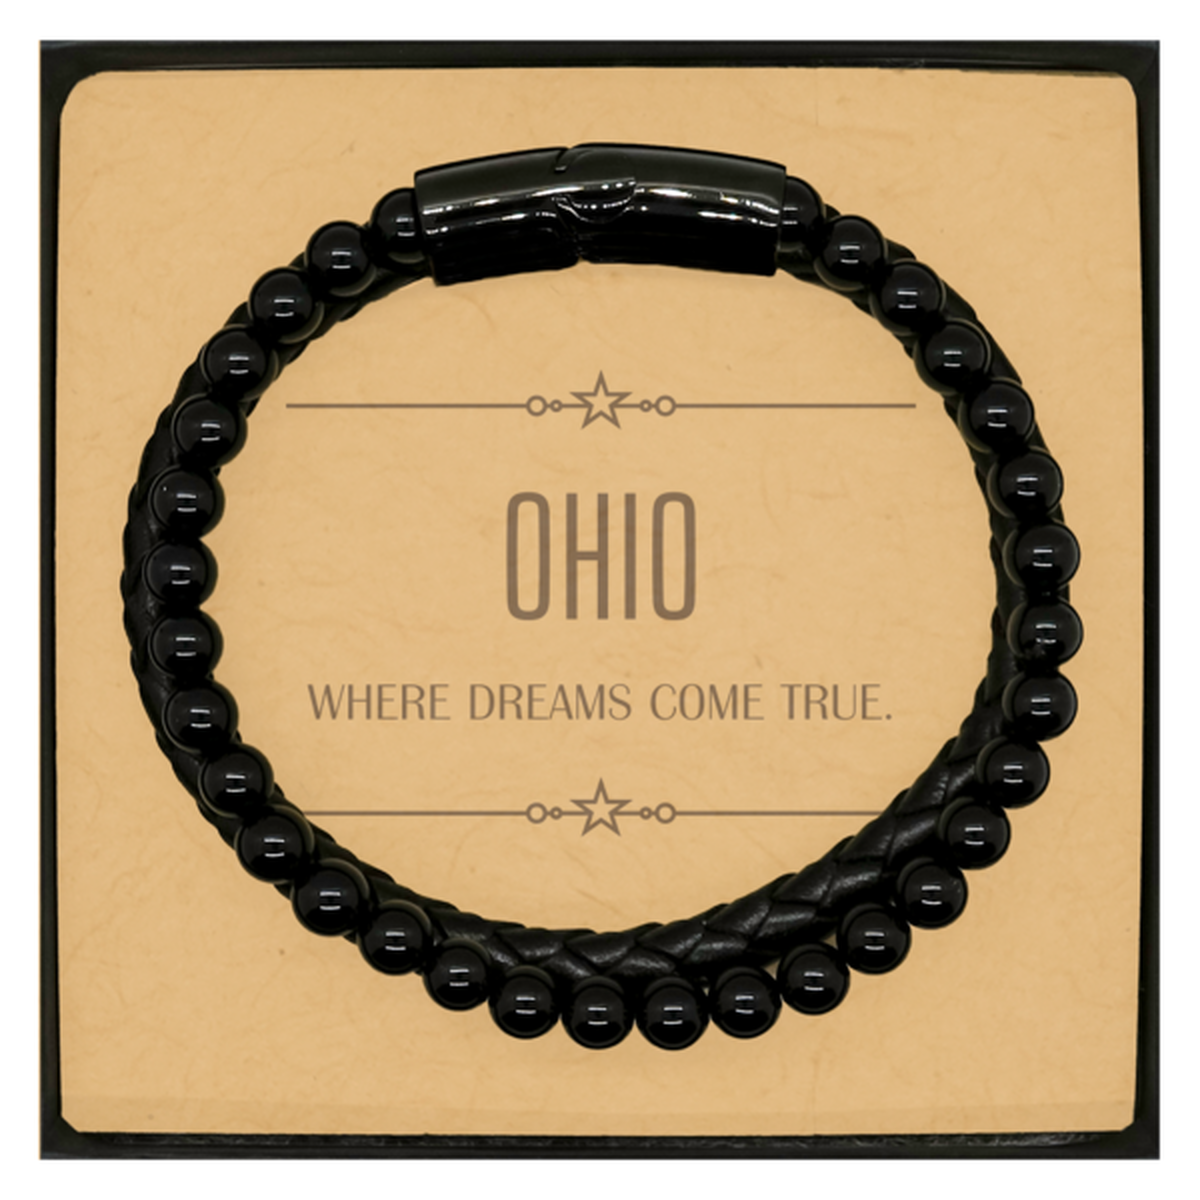 Love Ohio State Stone Leather Bracelets, Ohio Where dreams come true, Birthday Christmas Inspirational Gifts For Ohio Men, Women, Friends